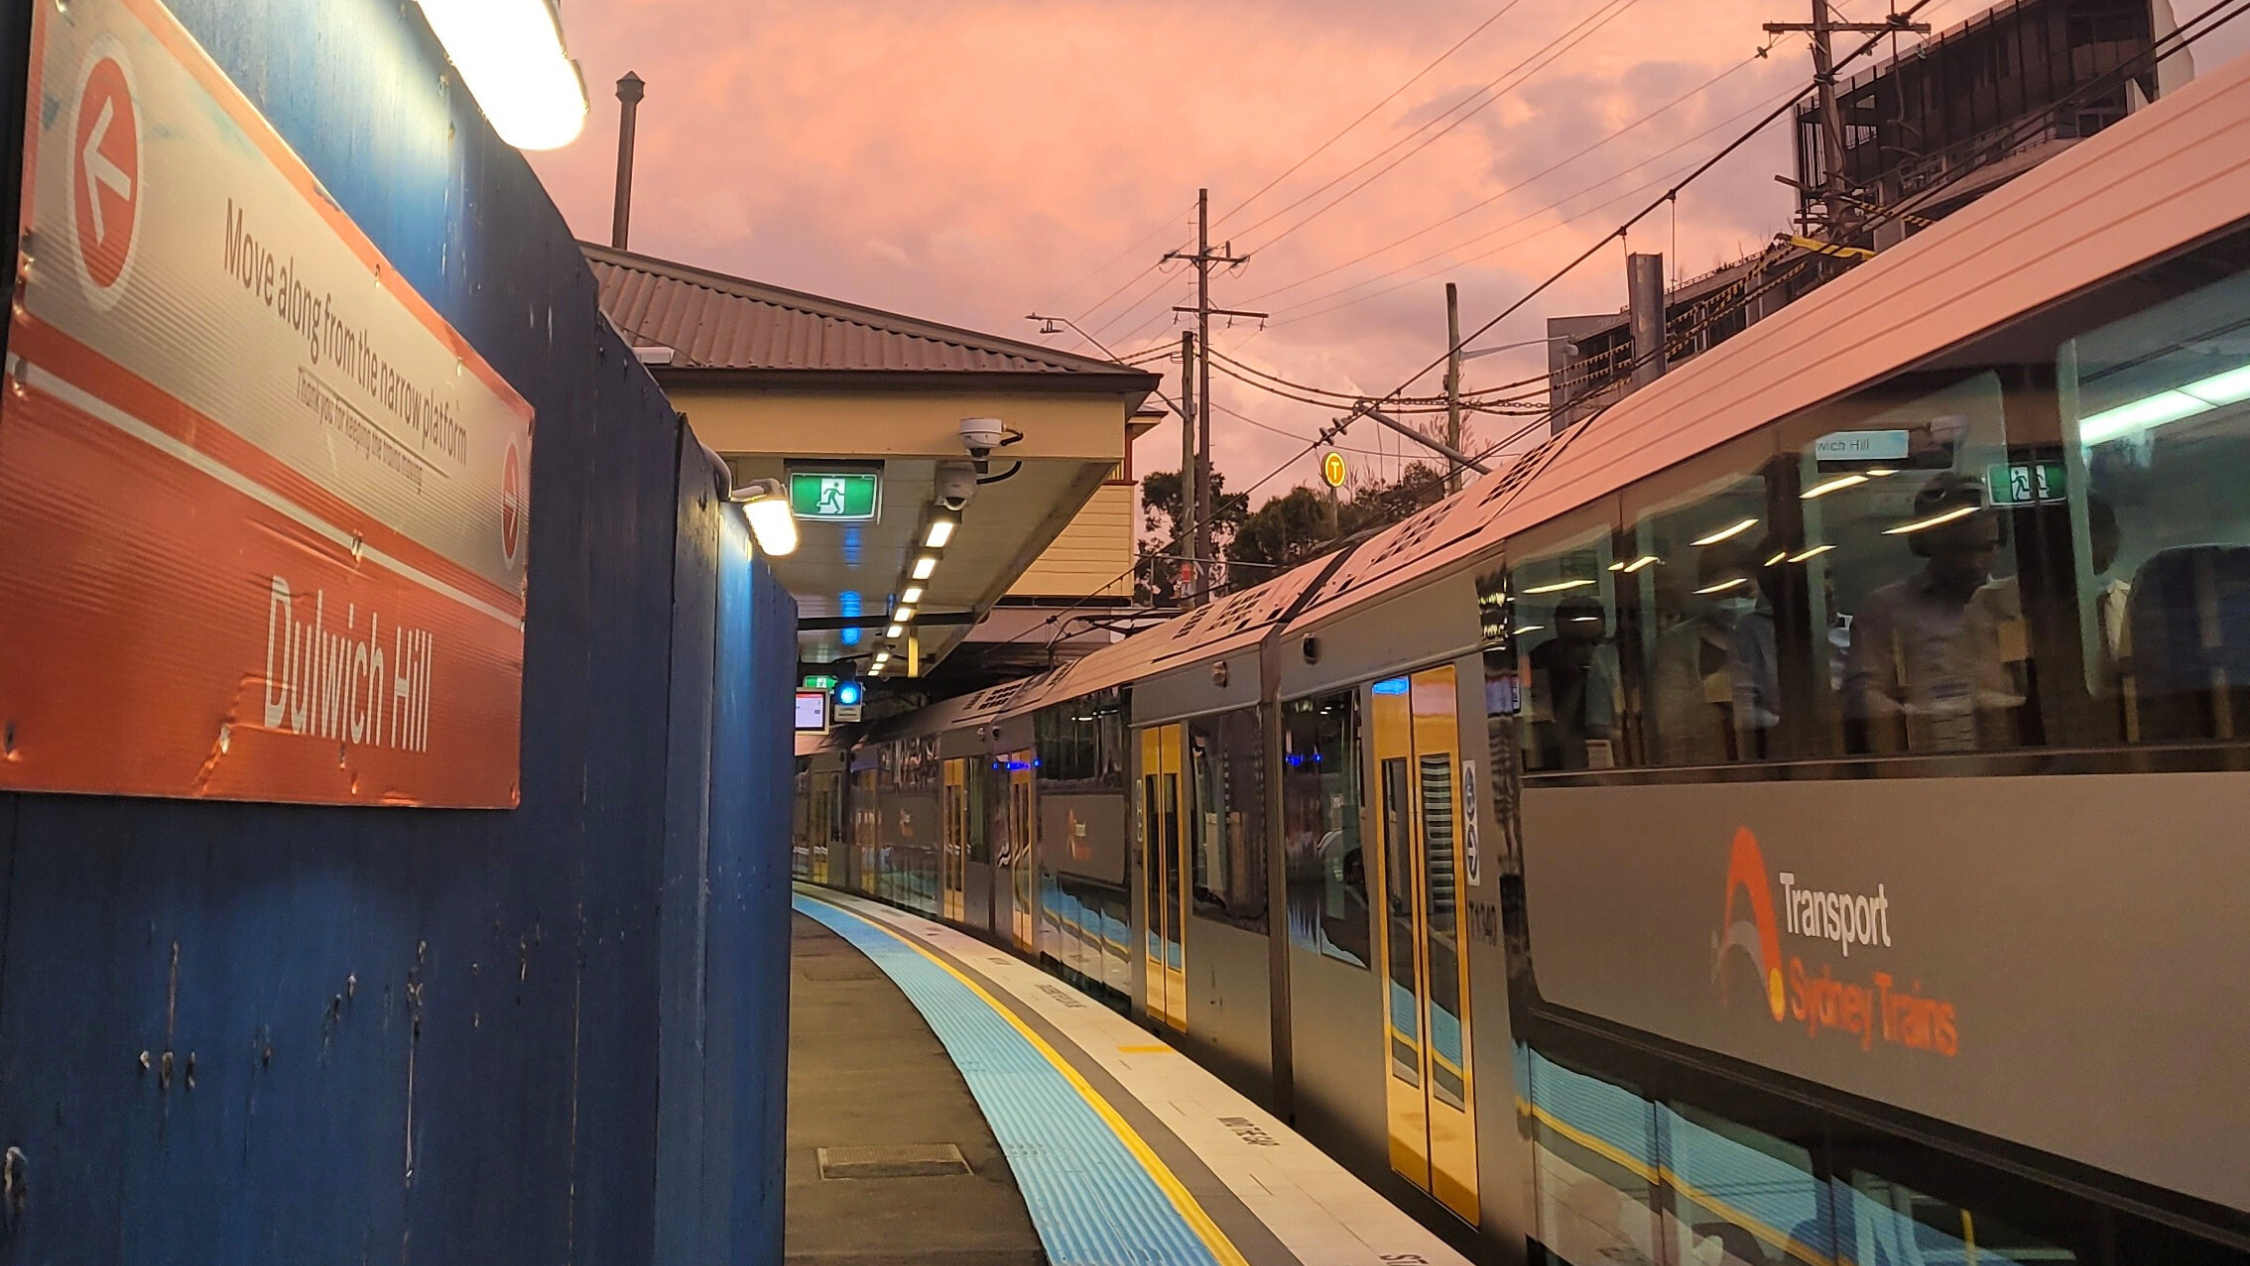 A train stopped at a station with a pretty pink sunset in the sky.